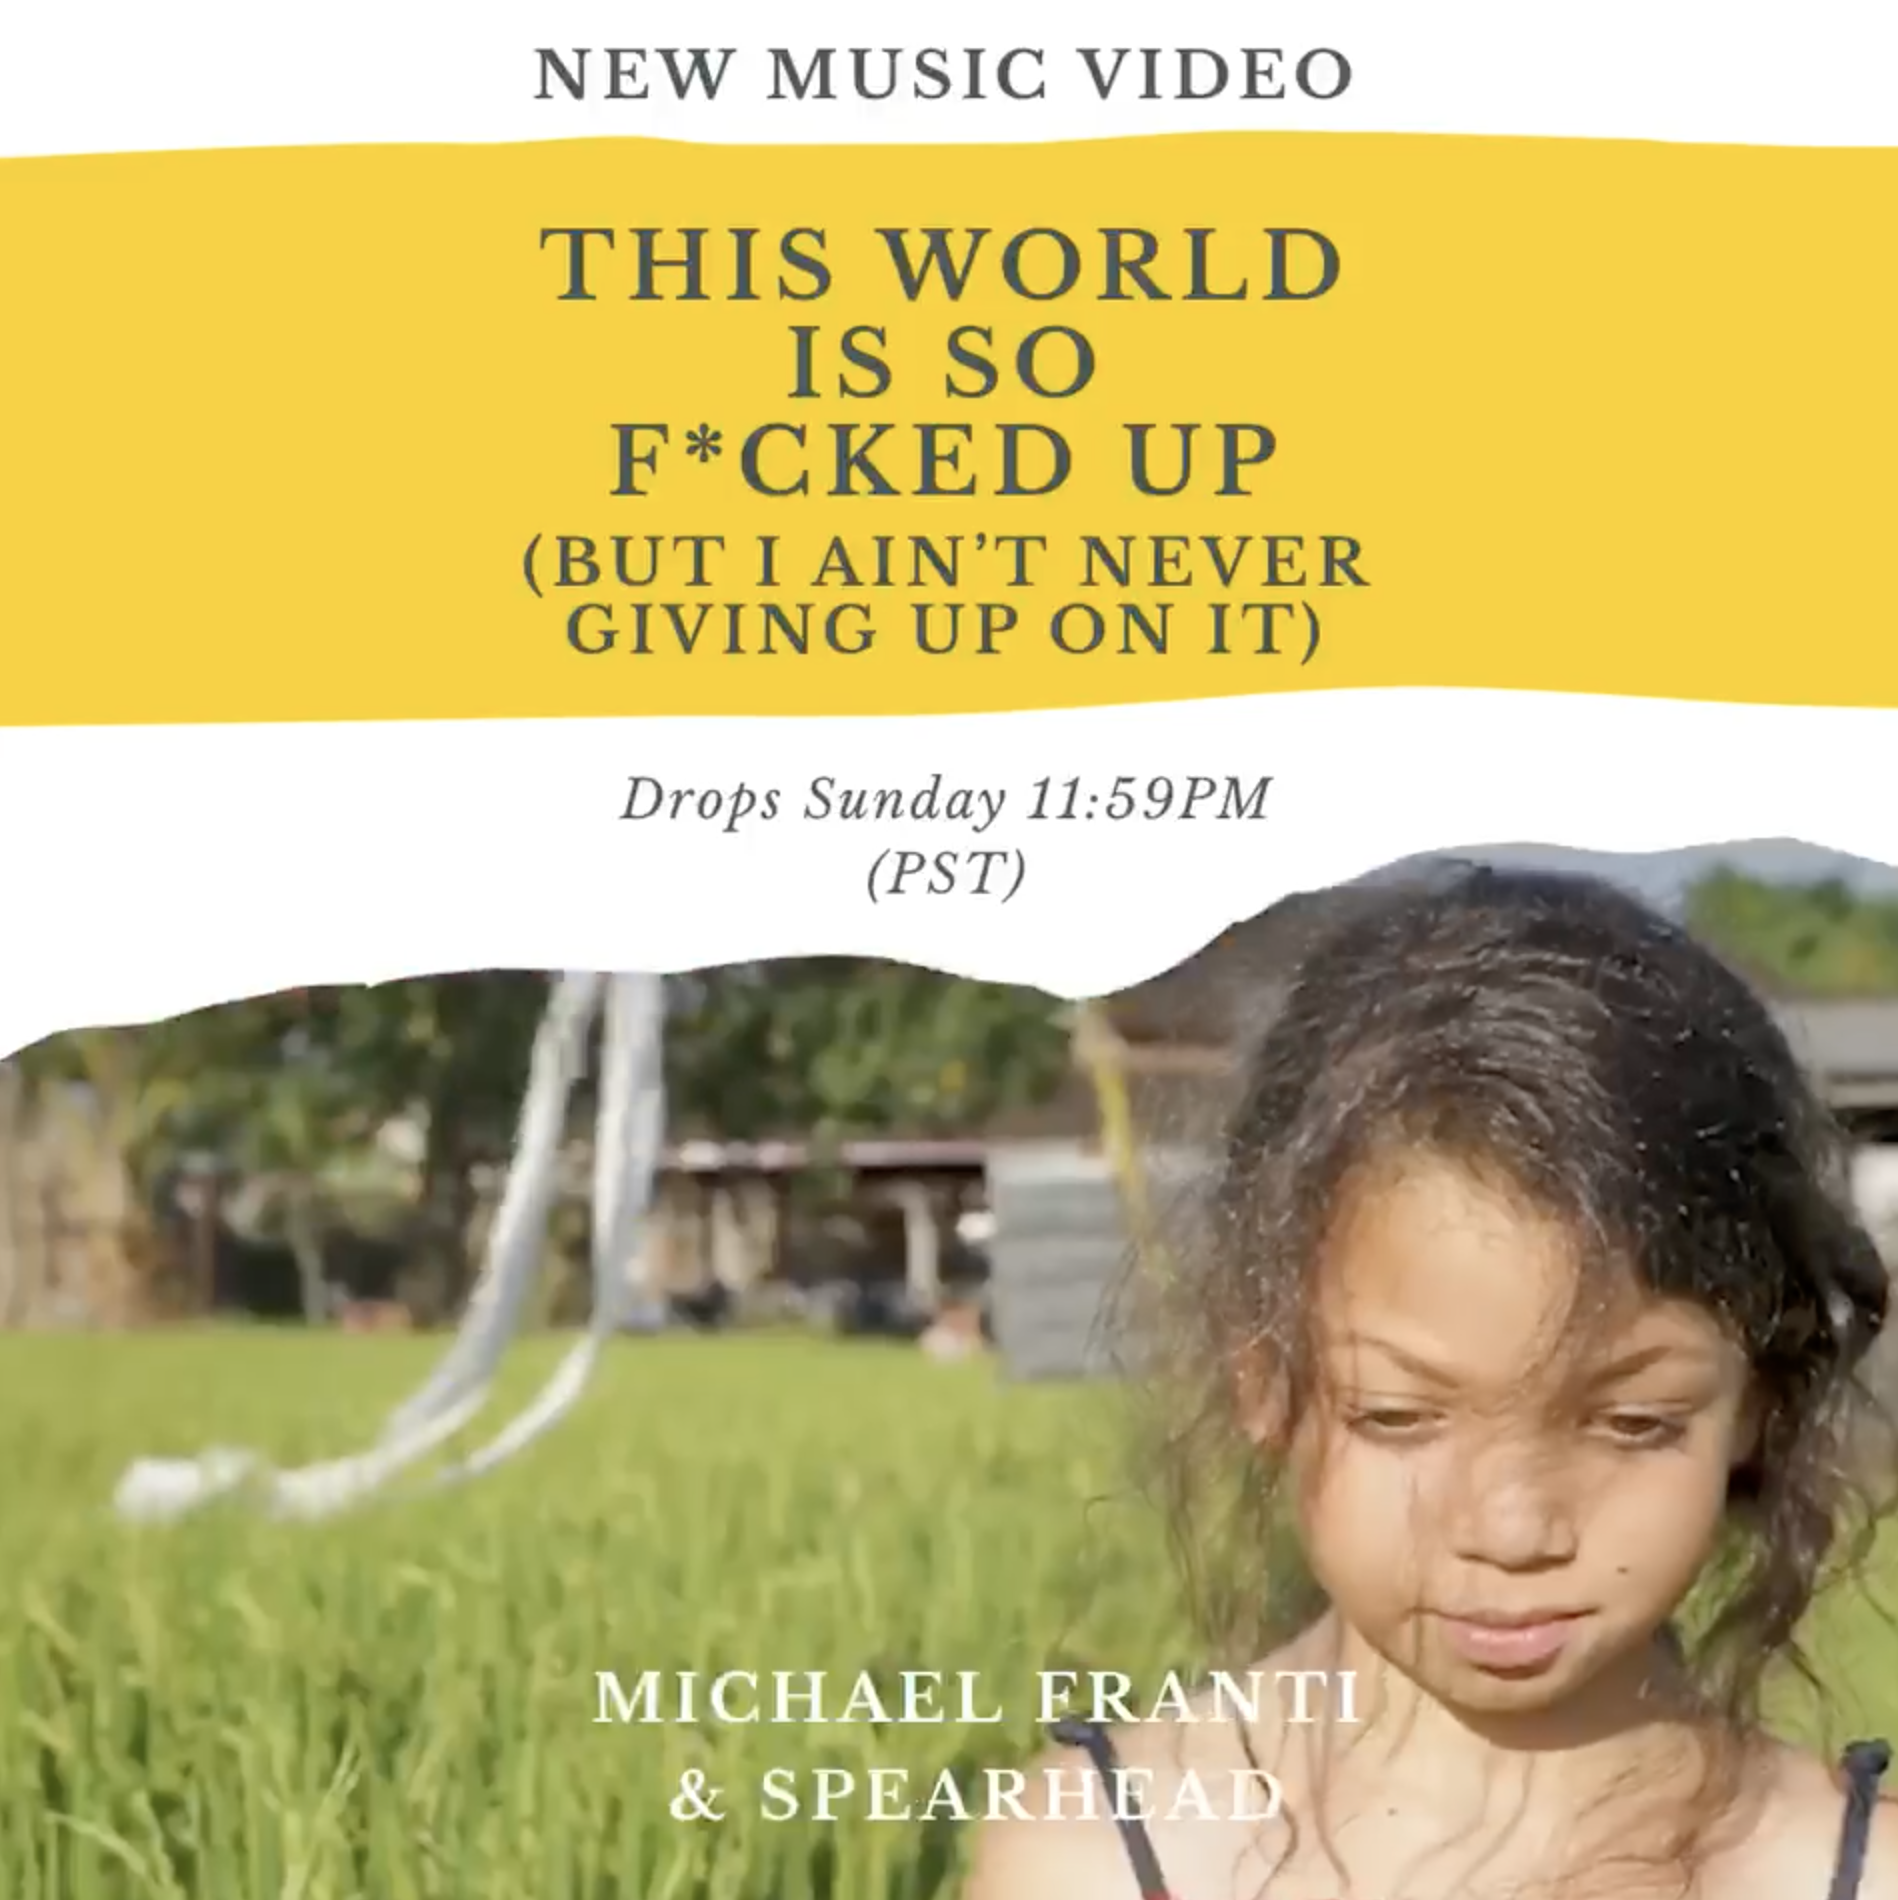 Video Premiere Tomorrow: “This World Is So F*cked Up (But I Ain’t Never Giving Up On It)”